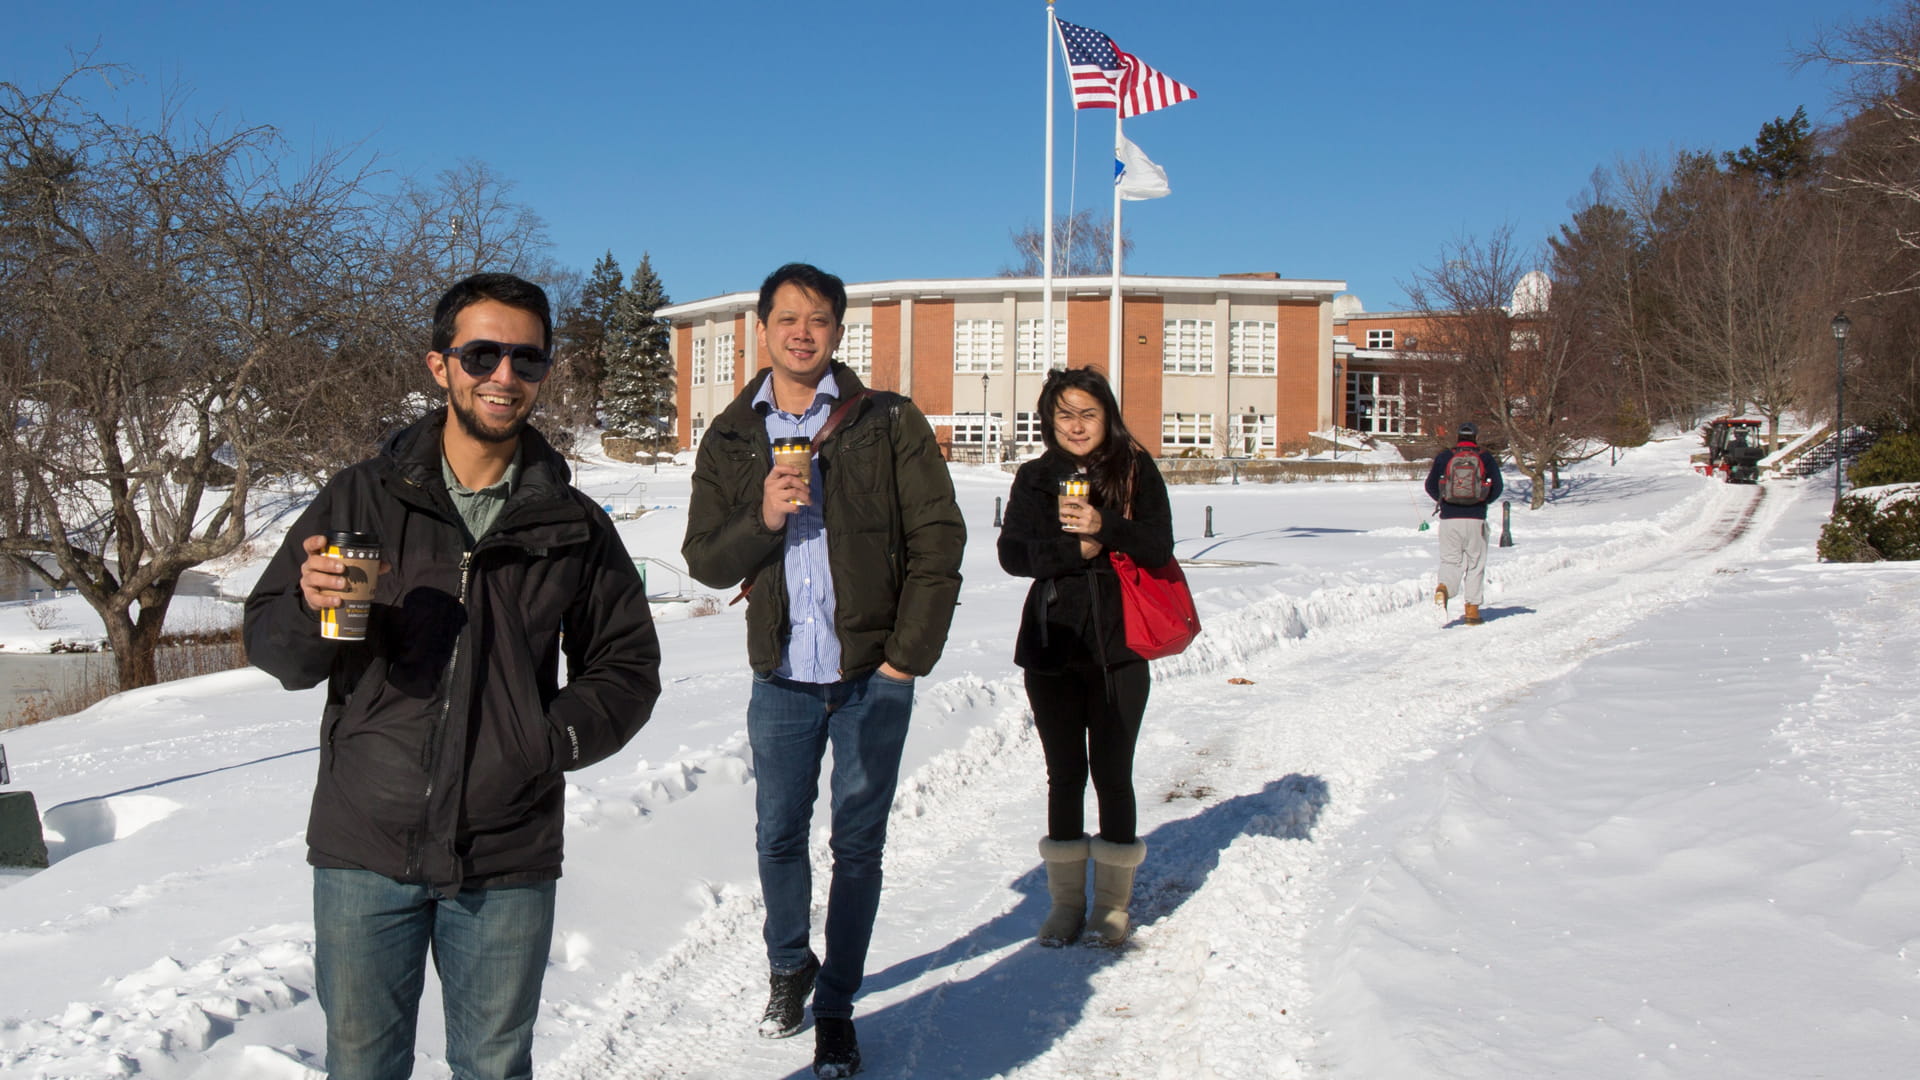 Three Endicott students walking from the academic center in the snow